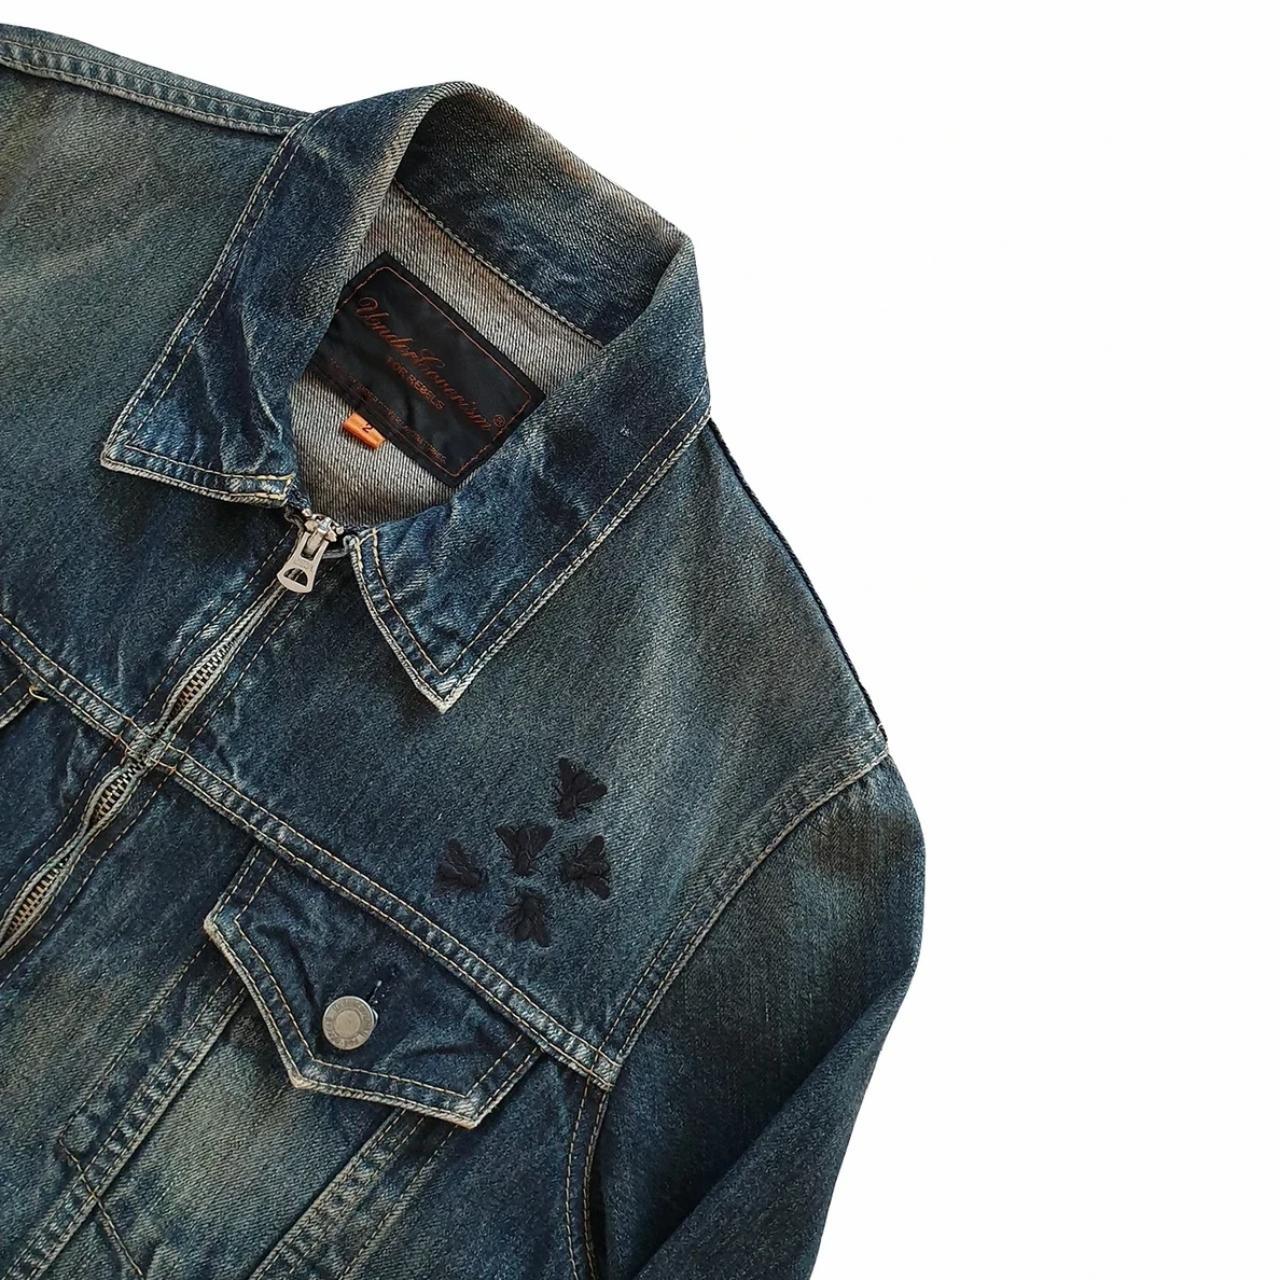 UNDERCOVER BUG INSECT DENIM JACKET AW06 